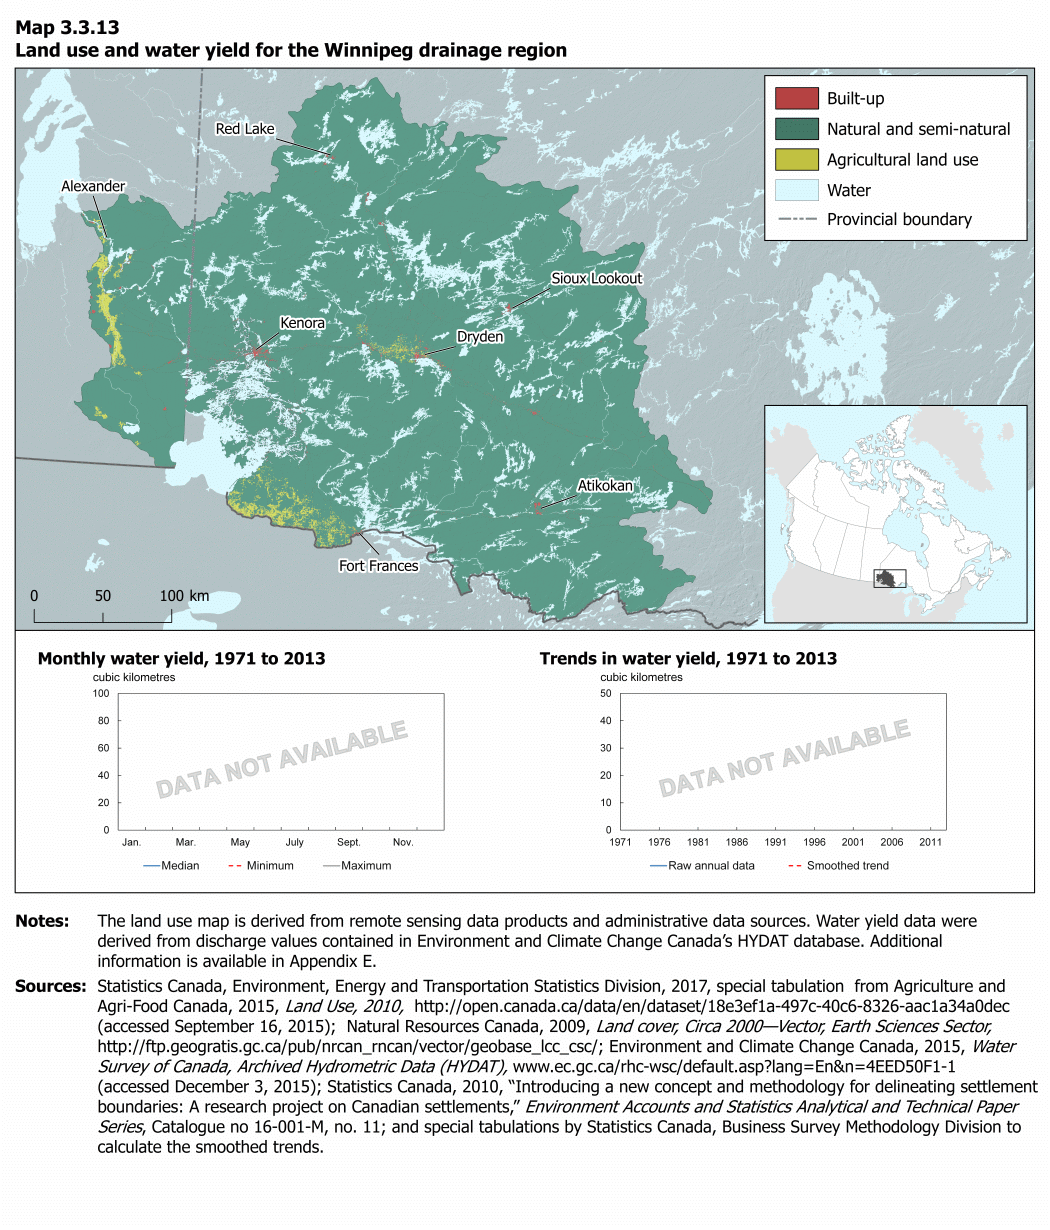 Map 3.3.13 Land use and water yield for the Winnipeg drainage region